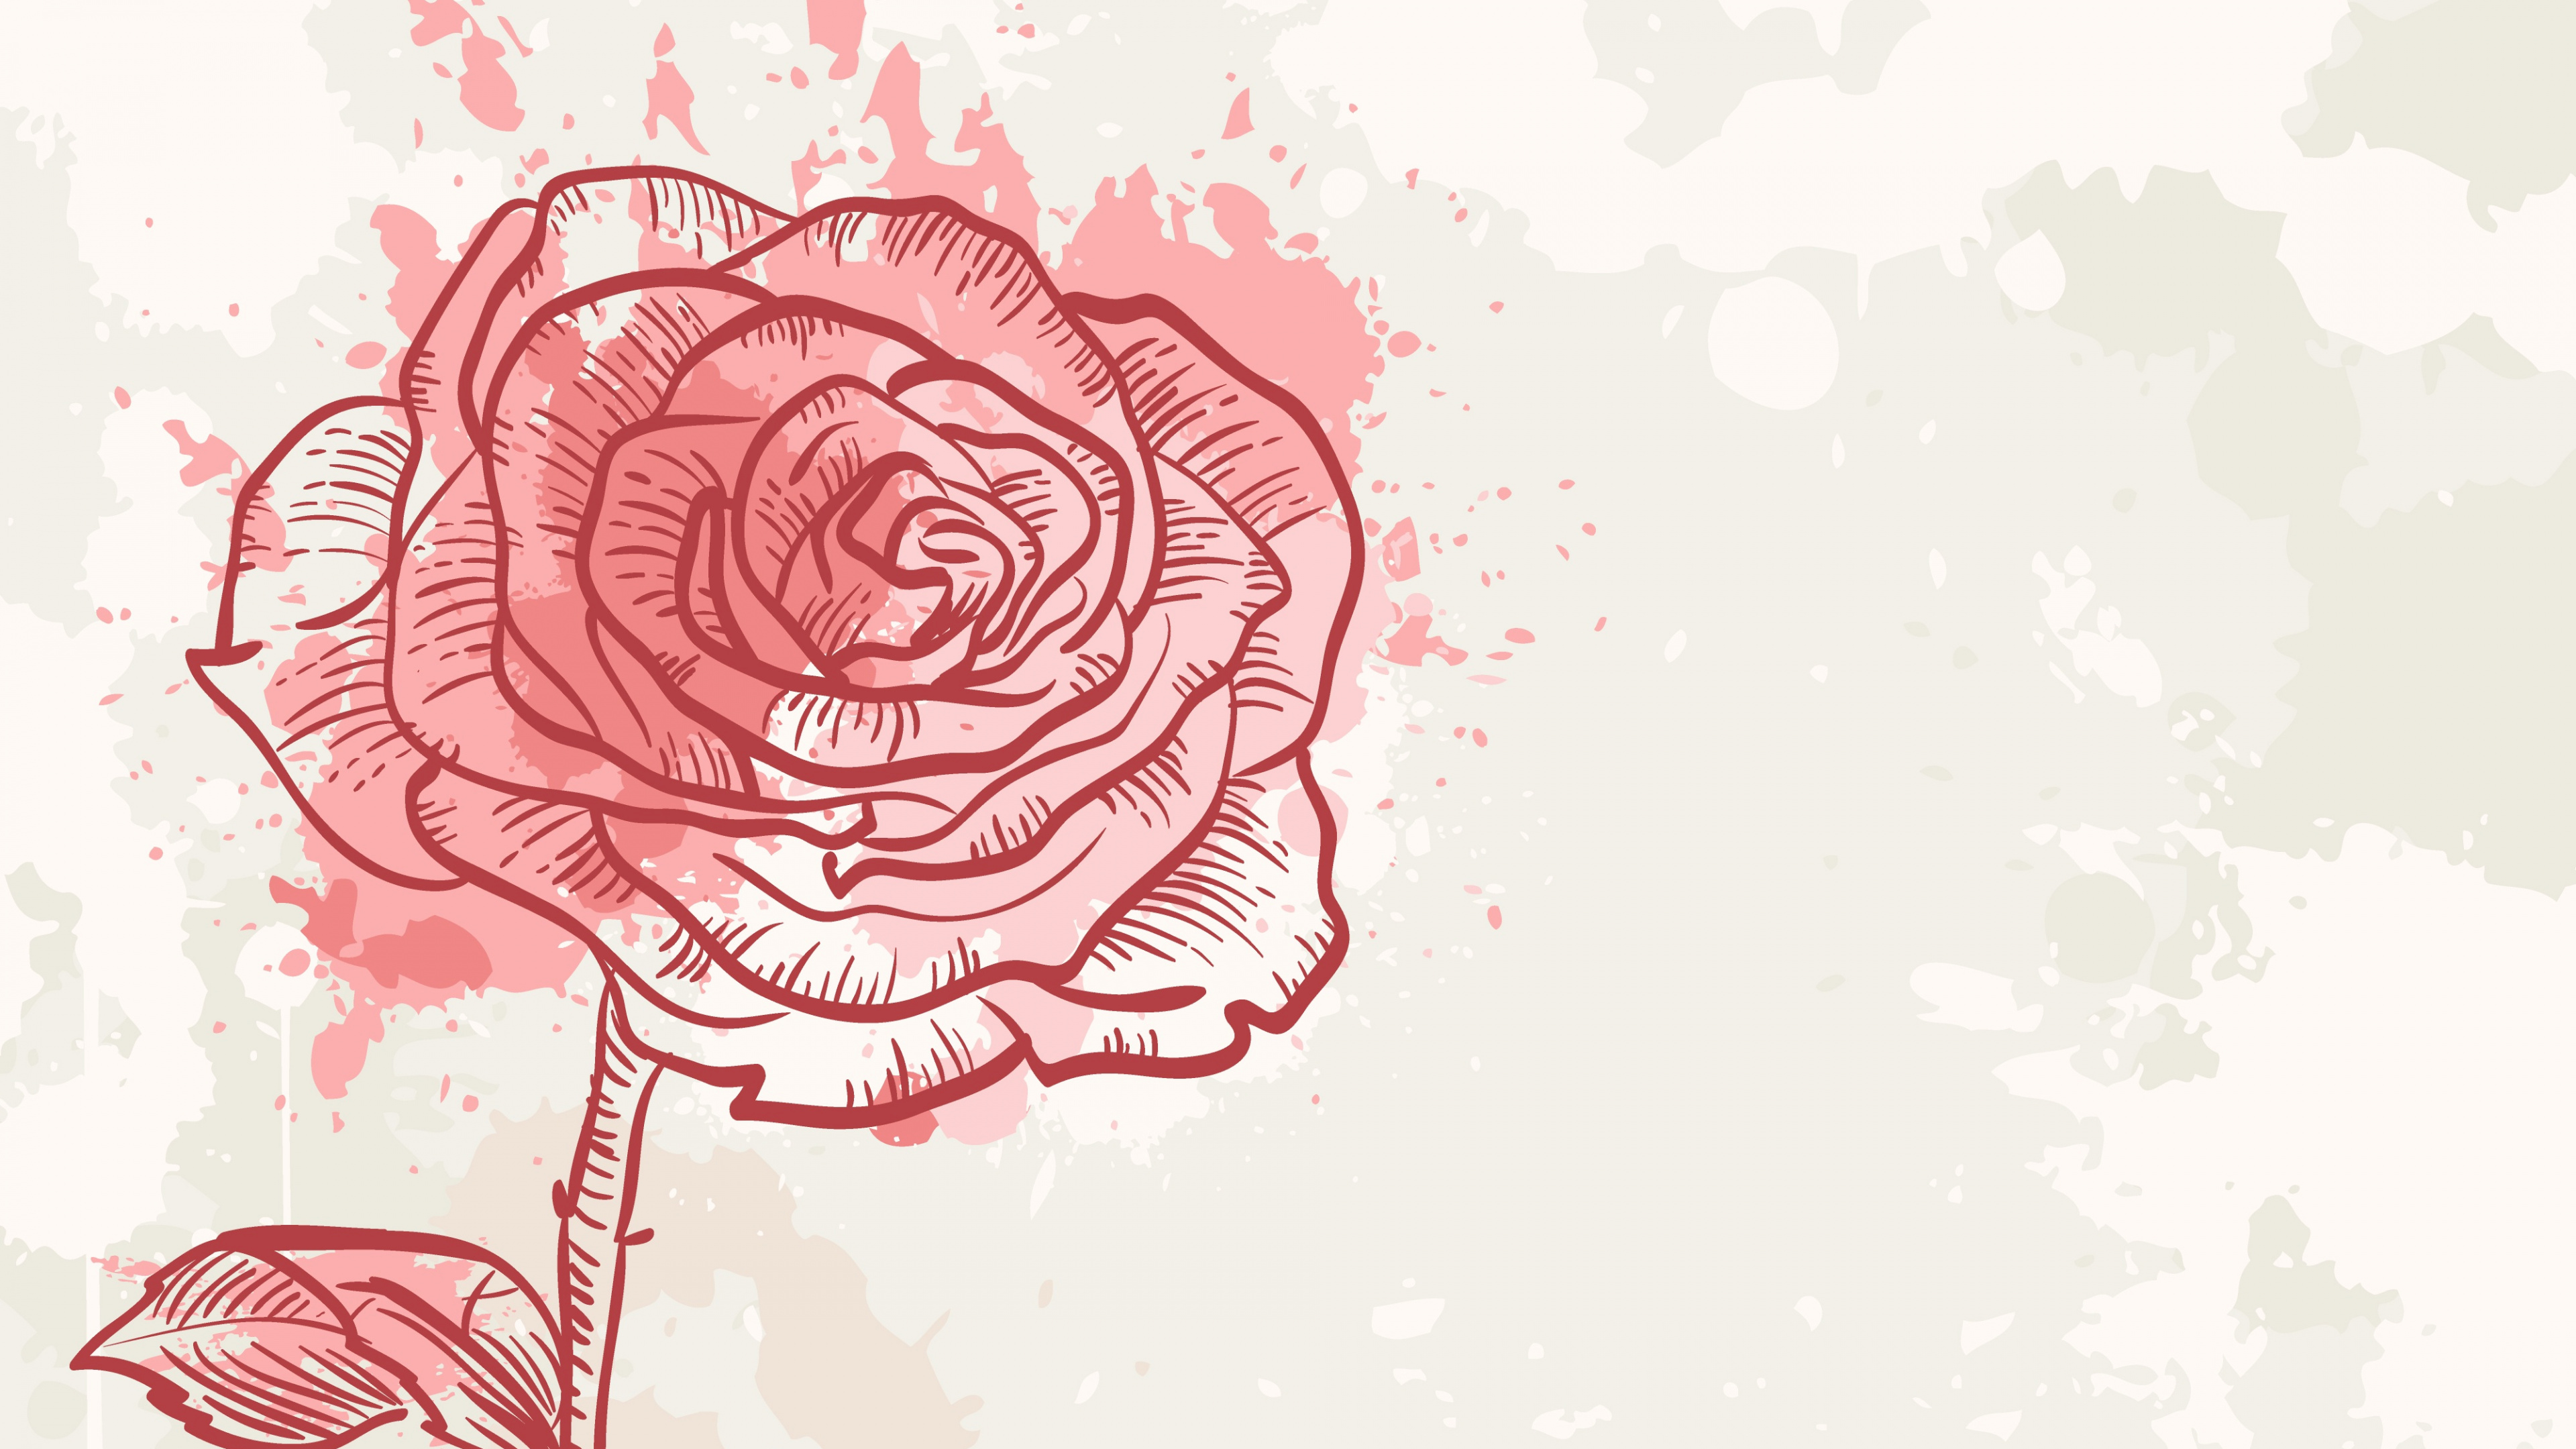 Pink and White Rose Flower Sketch. Wallpaper in 3840x2160 Resolution